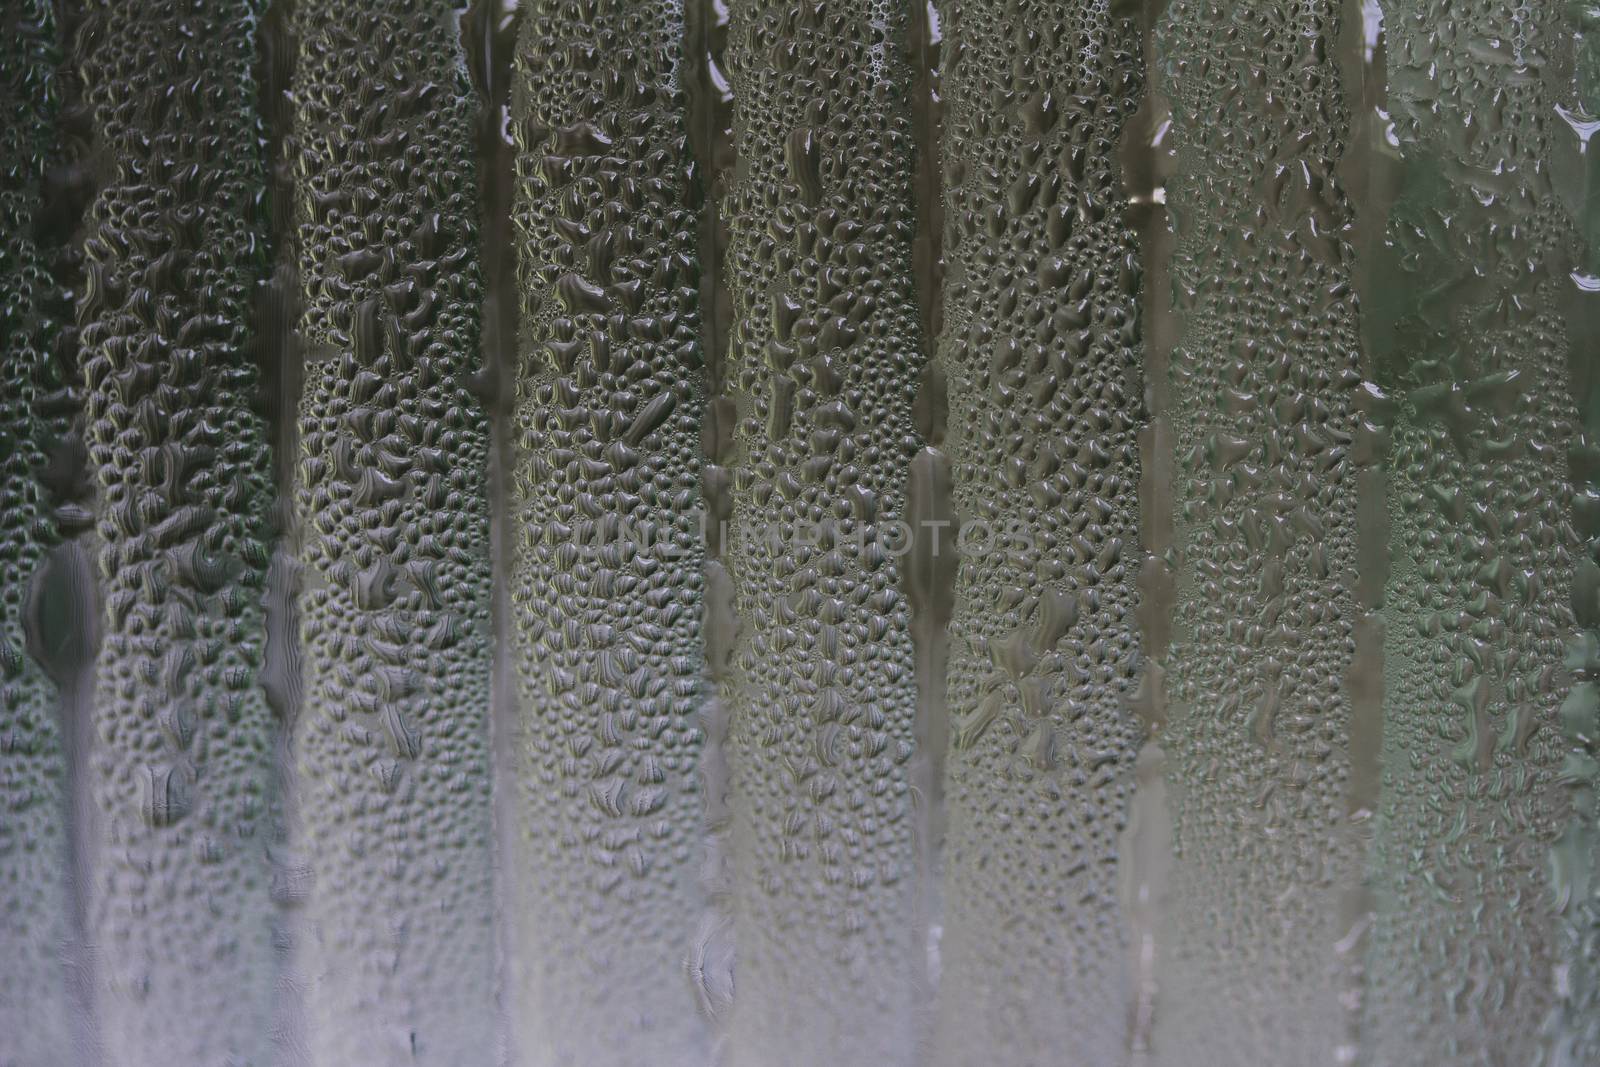 a jar covered with water condensation droplets lined up  by ibahoh